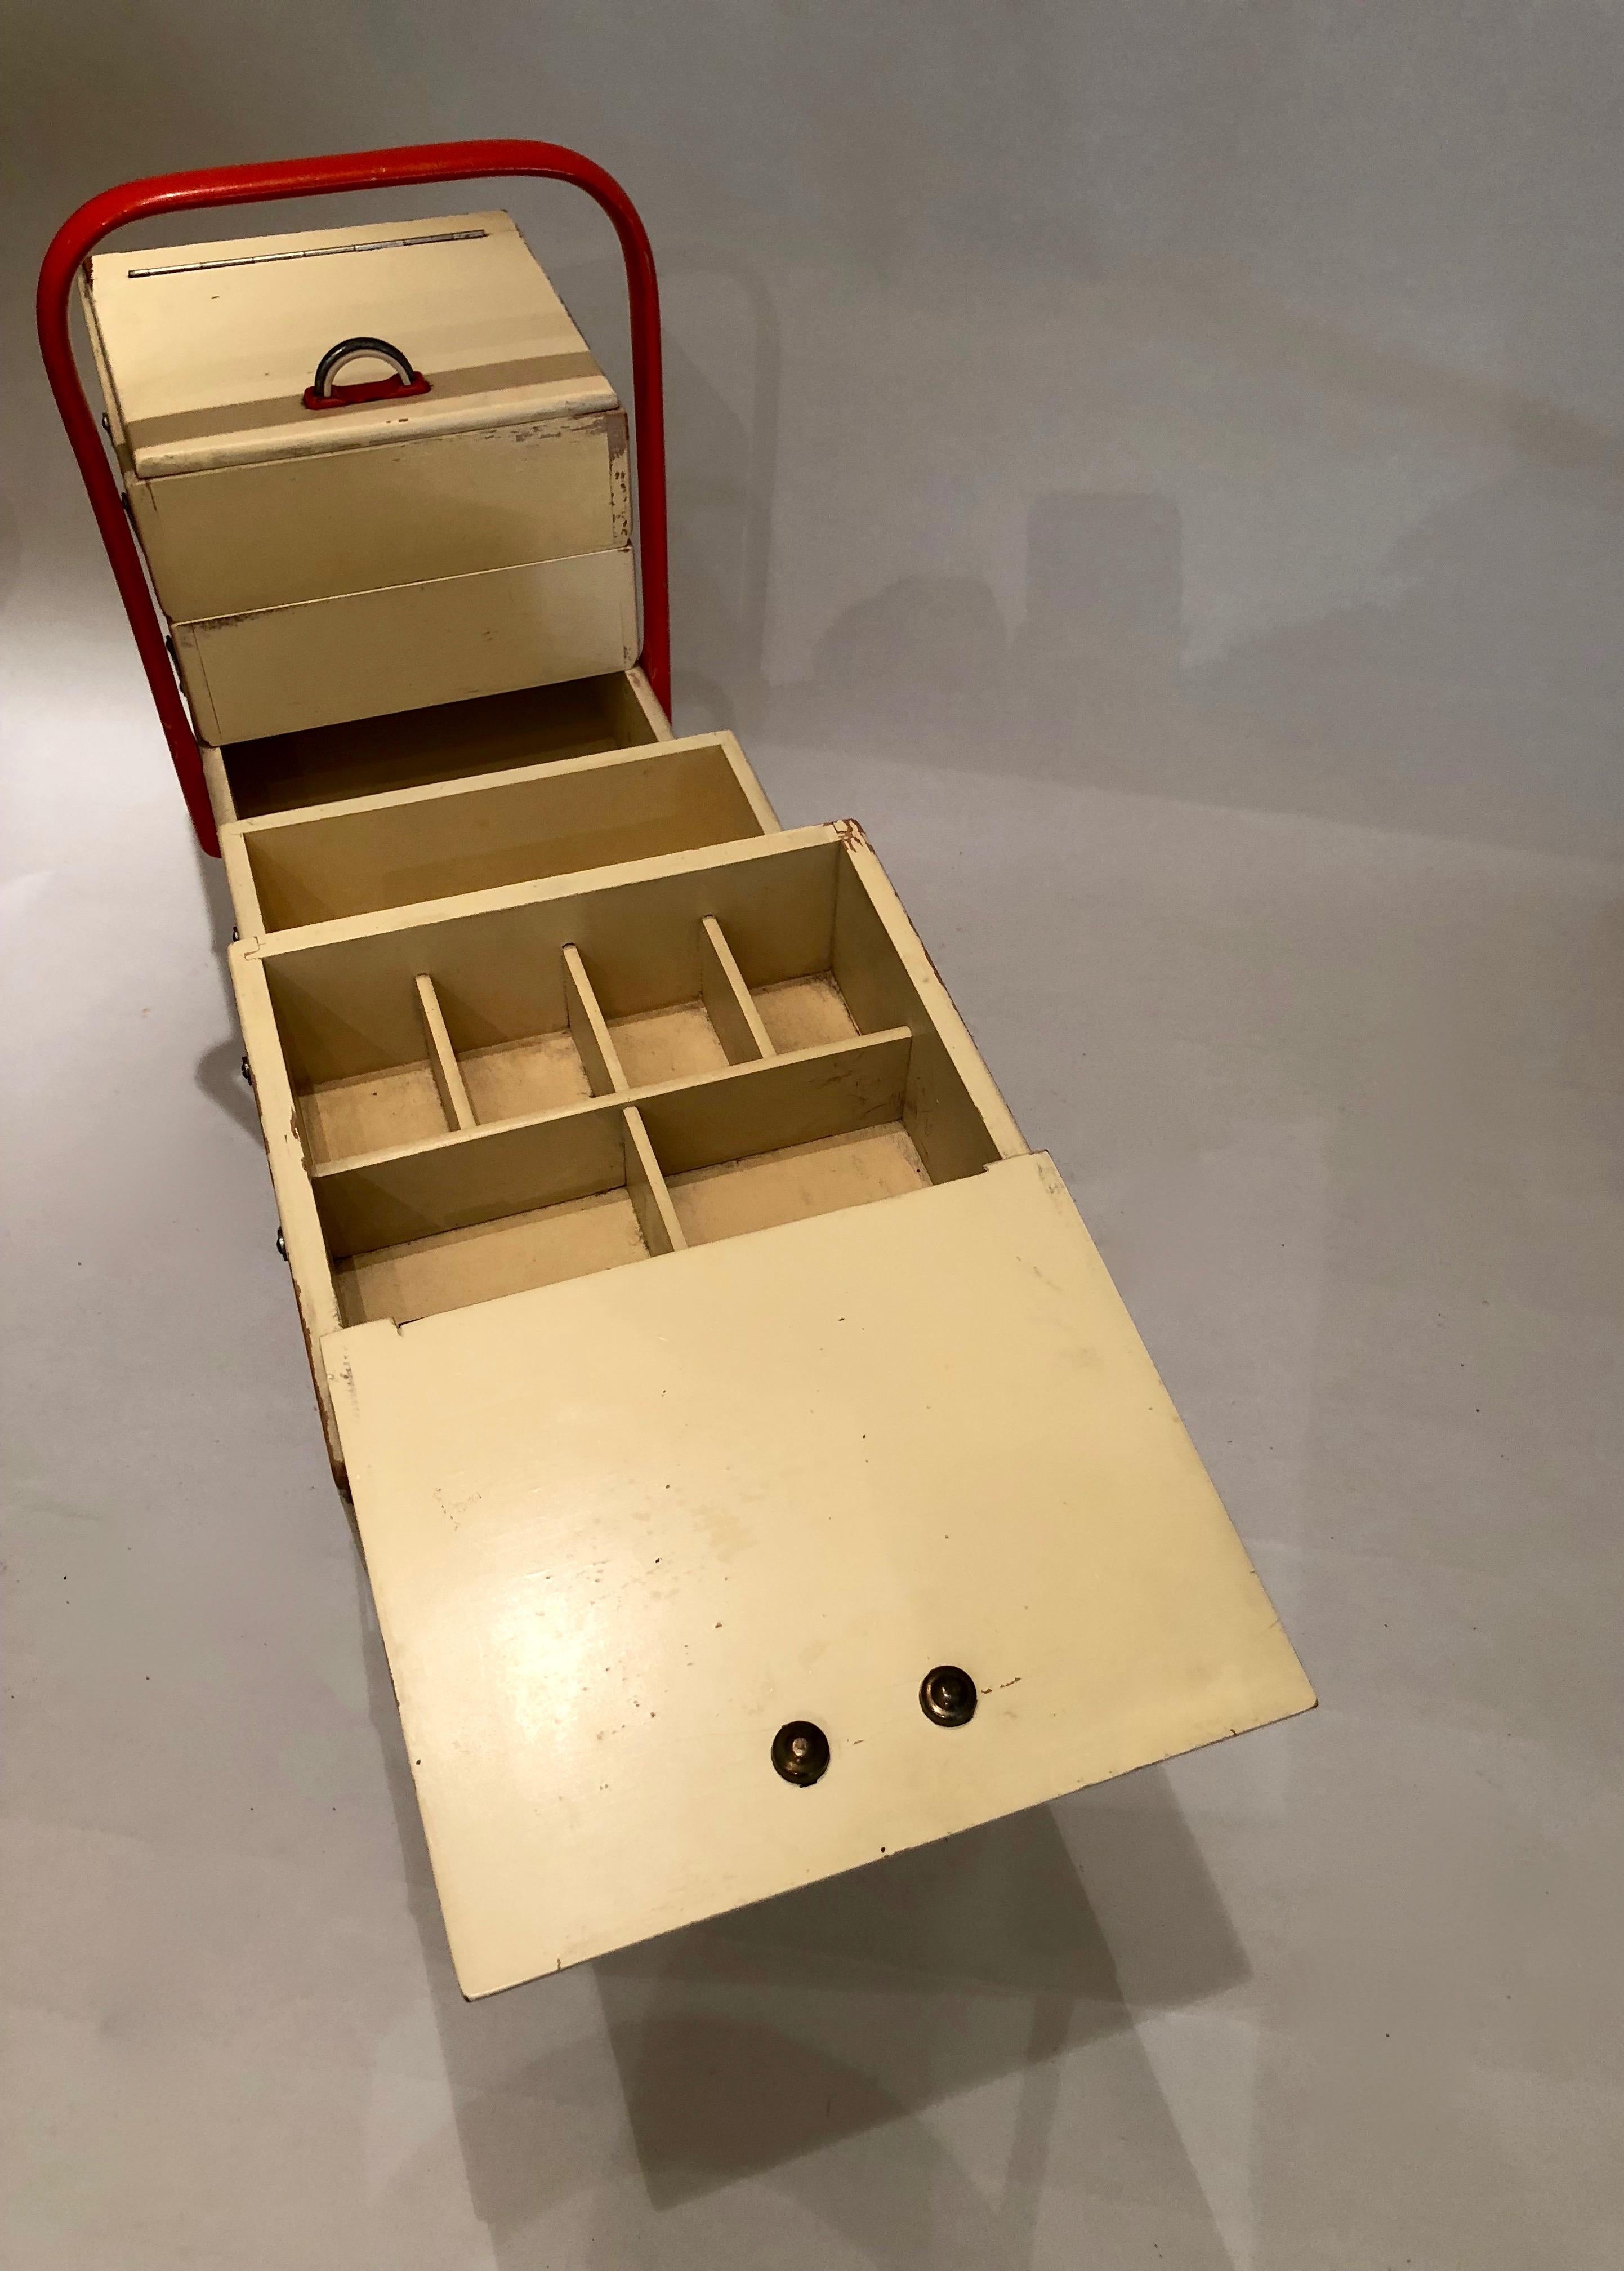 Sewing box with six folding drawers on wheels made of Bakelite.
Lacquered in coral and cream (Schleiflack); in original condition with beautiful patina.